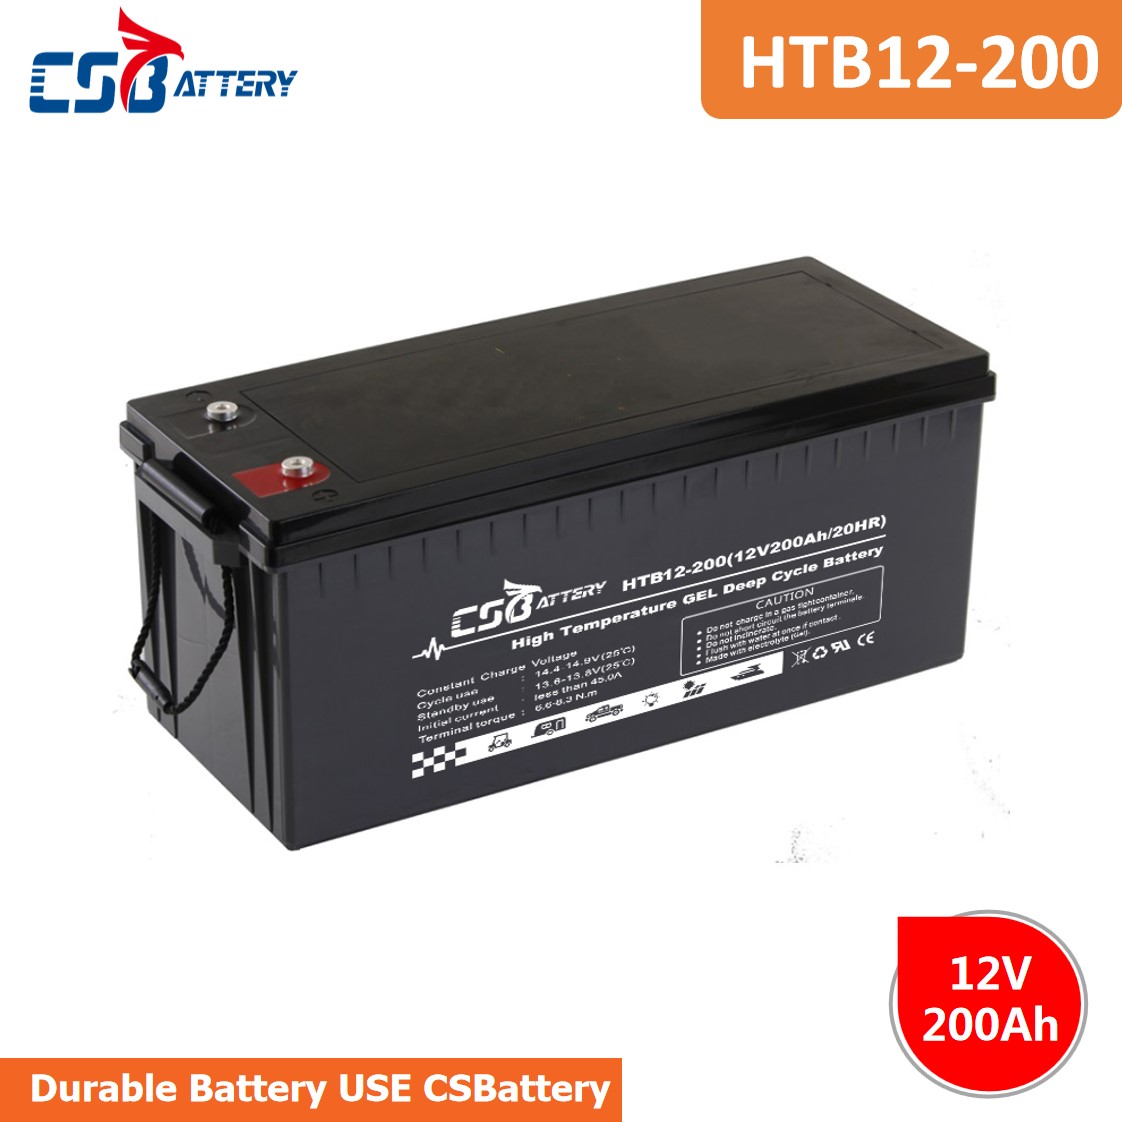 CSBattery 12V200AH Long life GEL Battery for marine/Automotive/motorcycle/bicycle/UPS/computer-backup-power 